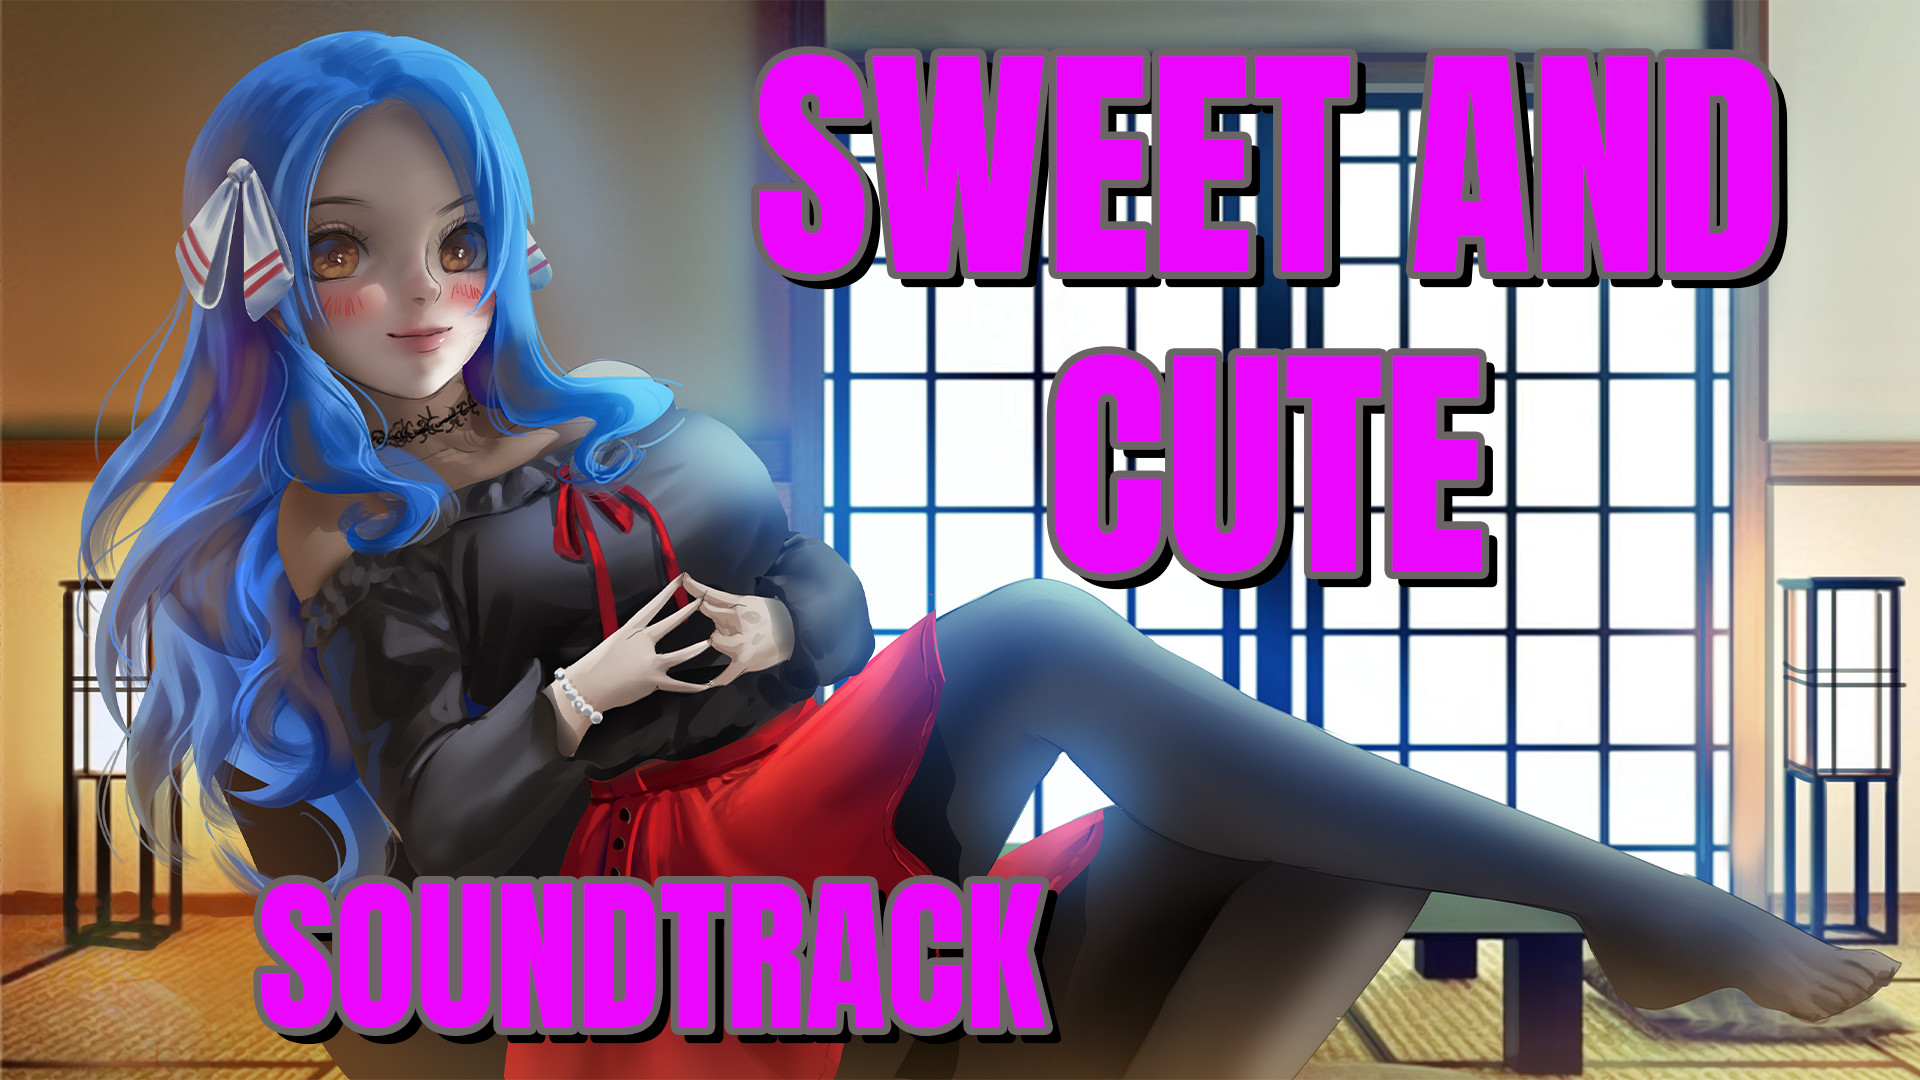 Sweet and Cute Soundtrack Featured Screenshot #1